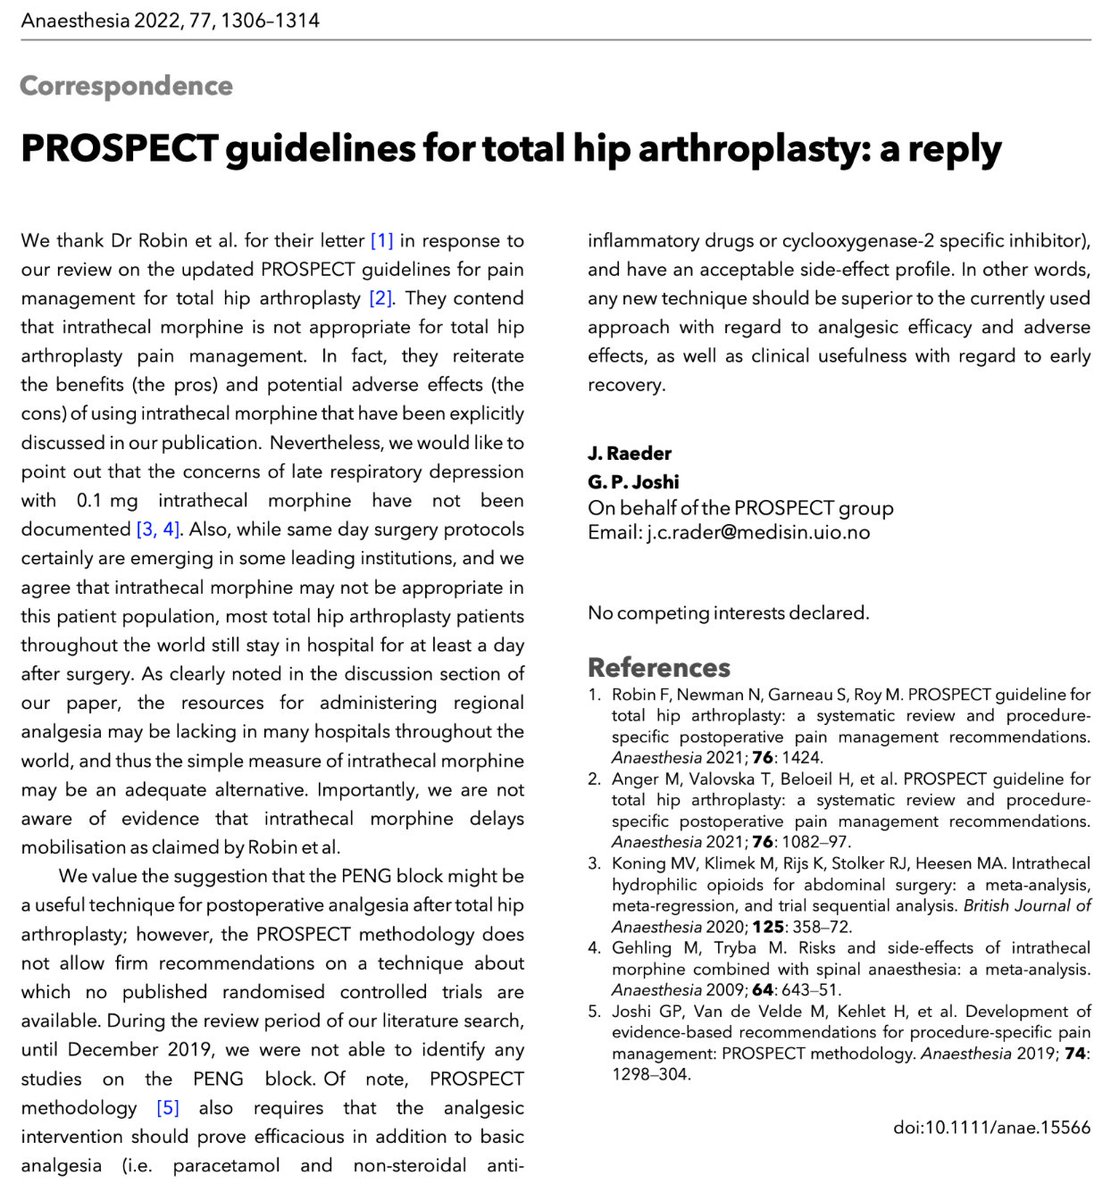 🔐PROSPECT guidelines for total hip arthroplasty: a reply. '...we would like to point out that the concerns of late respiratory depression with 0.1 mg intrathecal morphine have not been documented.' 🔗…-publications.onlinelibrary.wiley.com/doi/10.1111/an…